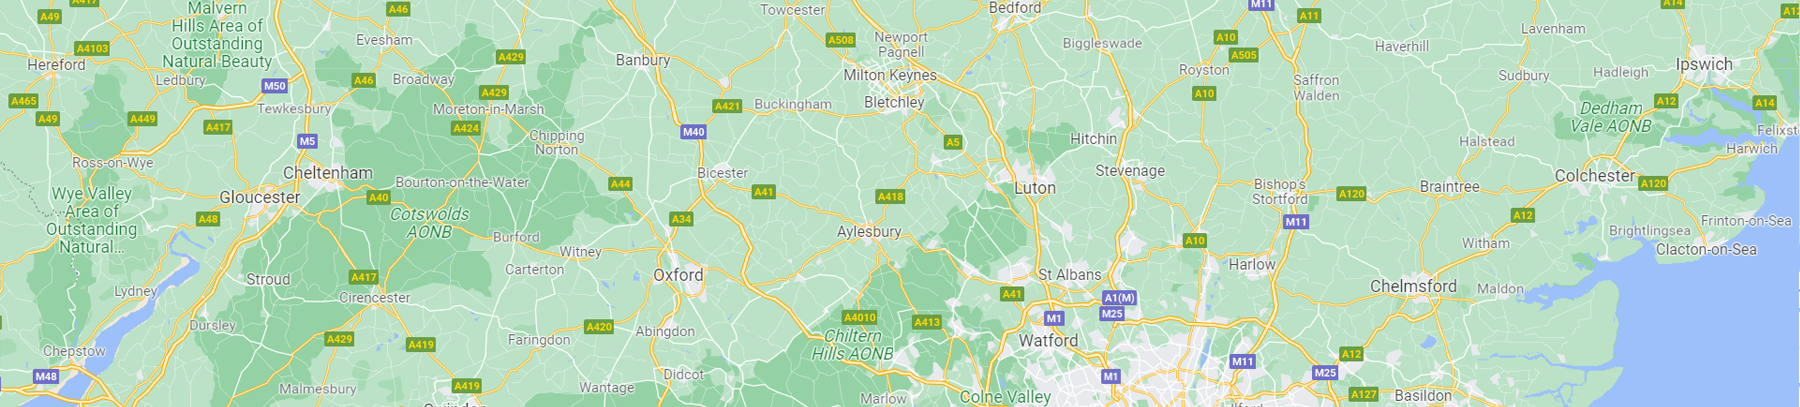 areas towns and villages we cover for wifi network coverage extension imrovements include hertfordshire stevenage hitchin letchworth hatfield welwyn garden city old welwyn digswell hertford bengeo harpenden wheathamsted hemel hempsted chorley wood m 25 tring dunstable bedfordshire bedford sandy biggleswade broom royston essex roydon buckinghamshire north london barnet enfield loughton elstree A1 colne valley